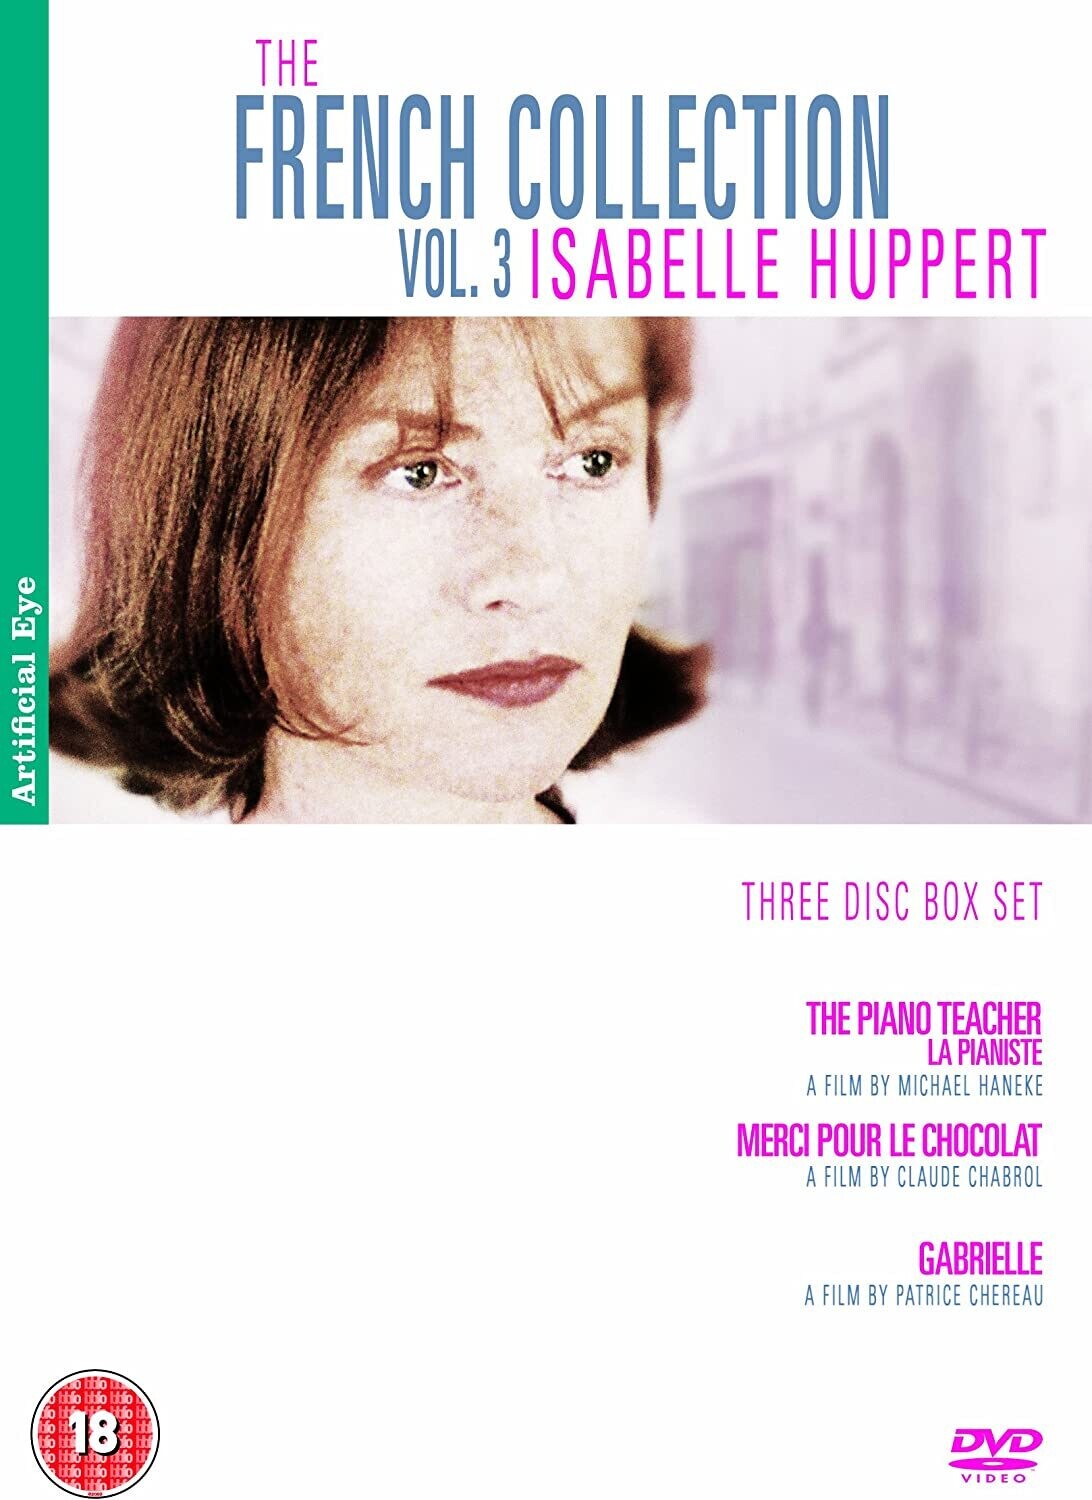 The French Collection Vol 3: Isabelle Huppert - Merci Pour Le Chocolat, Gabrielle, The Piano Teacher [DVD]